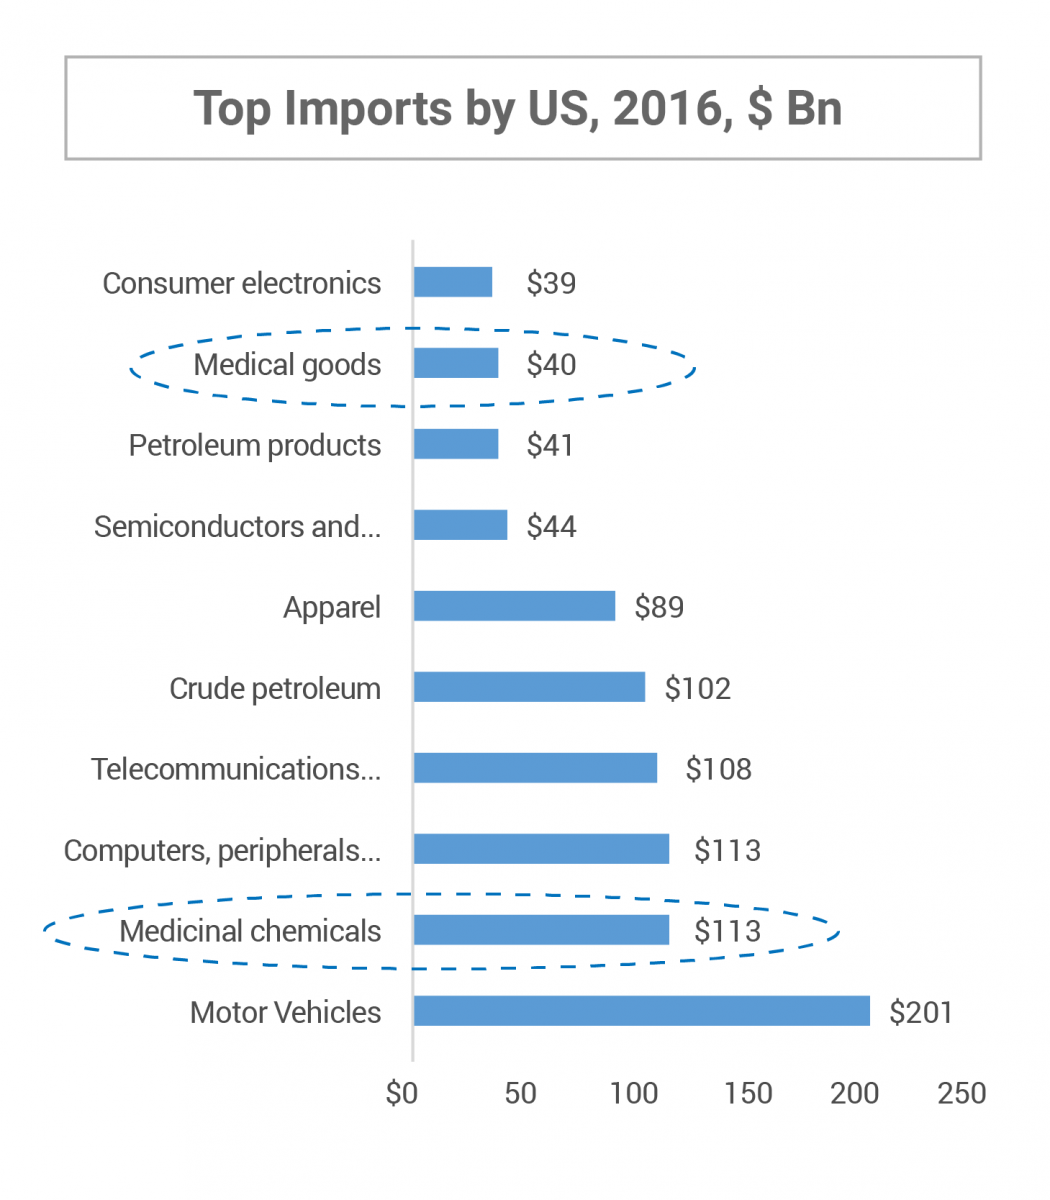 Top Imports by US, 2016, $ Bn